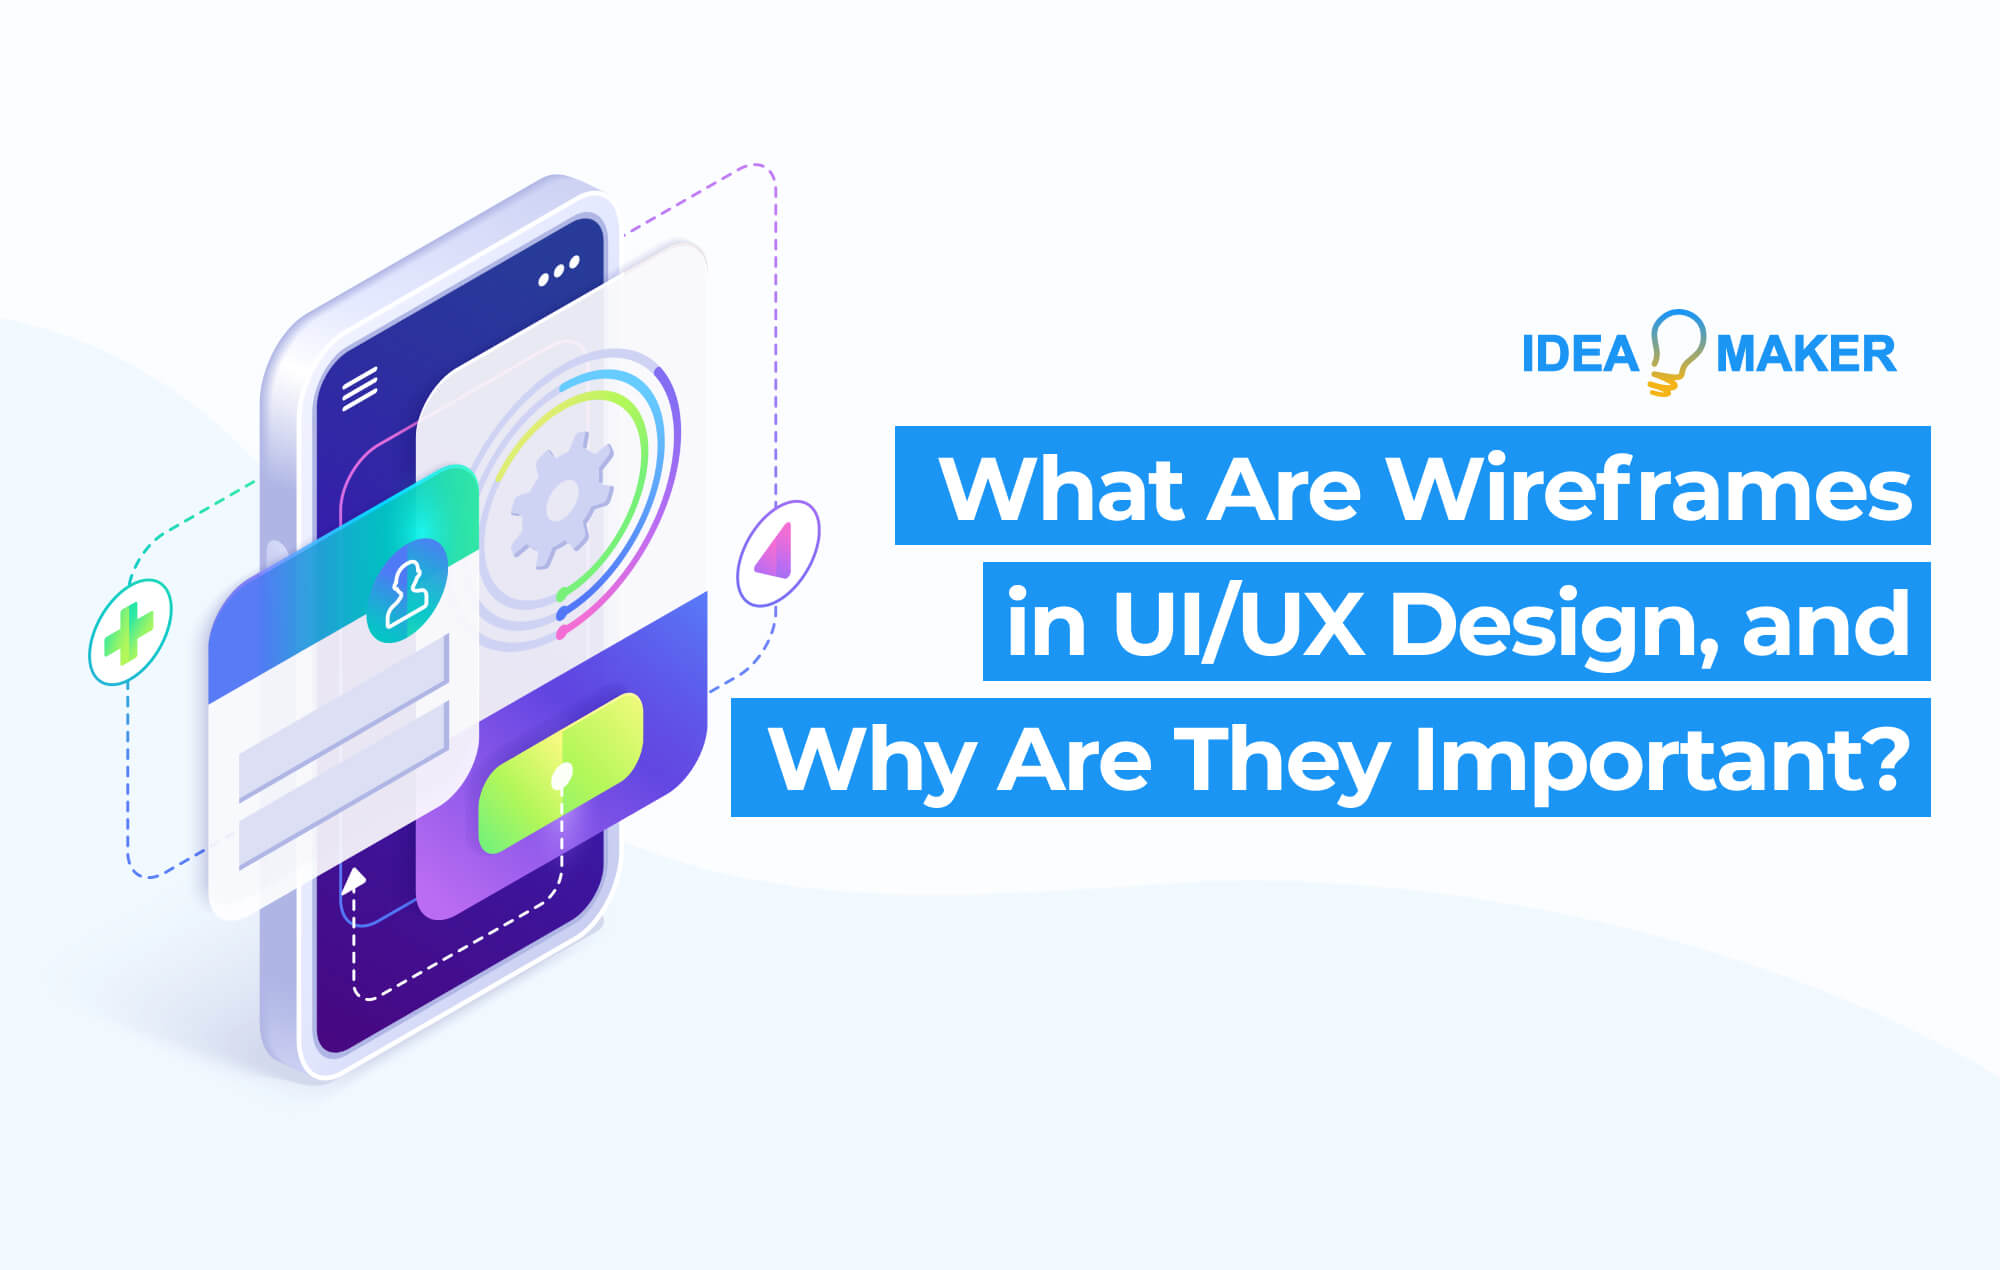 What Are Wireframes in UI/UX Design and Why Are They Important?